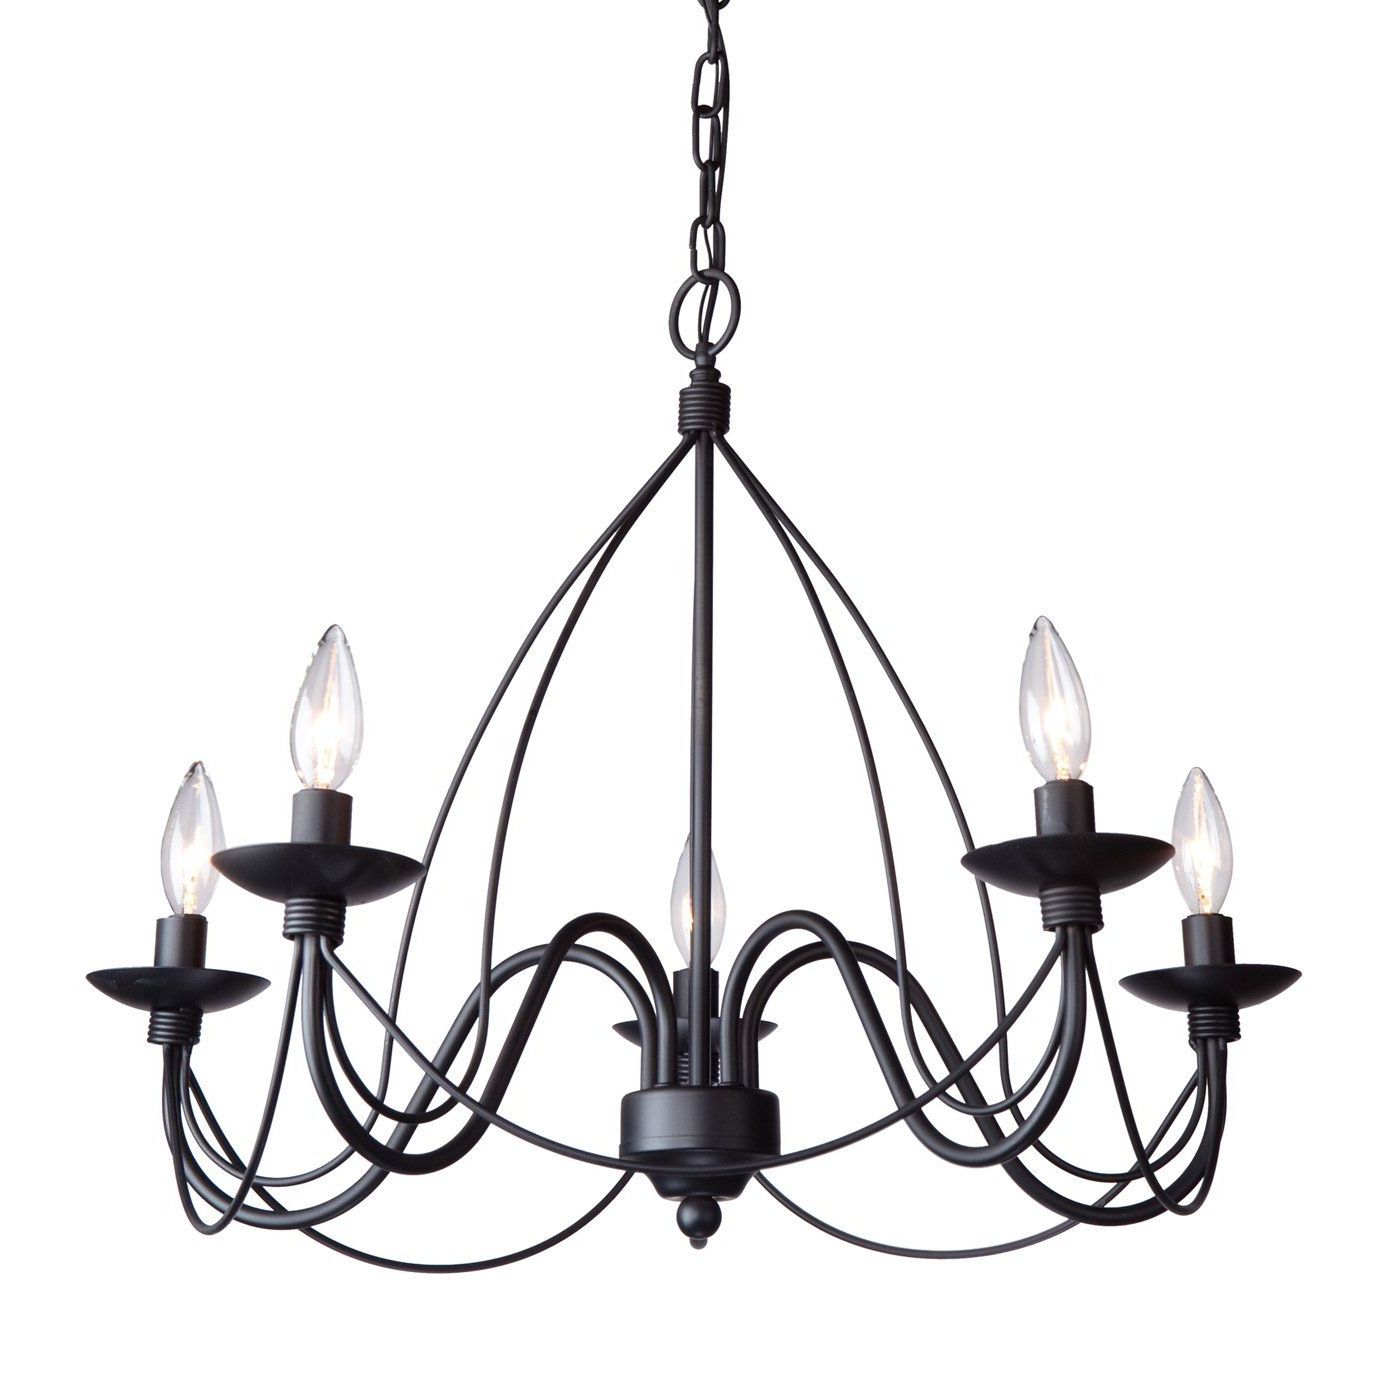 Perseus 6 Light Candle Style Chandeliers Intended For Preferred Artcraft Lighting Ac1485 Wrought Iron 5 Light Chandelier (View 23 of 25)